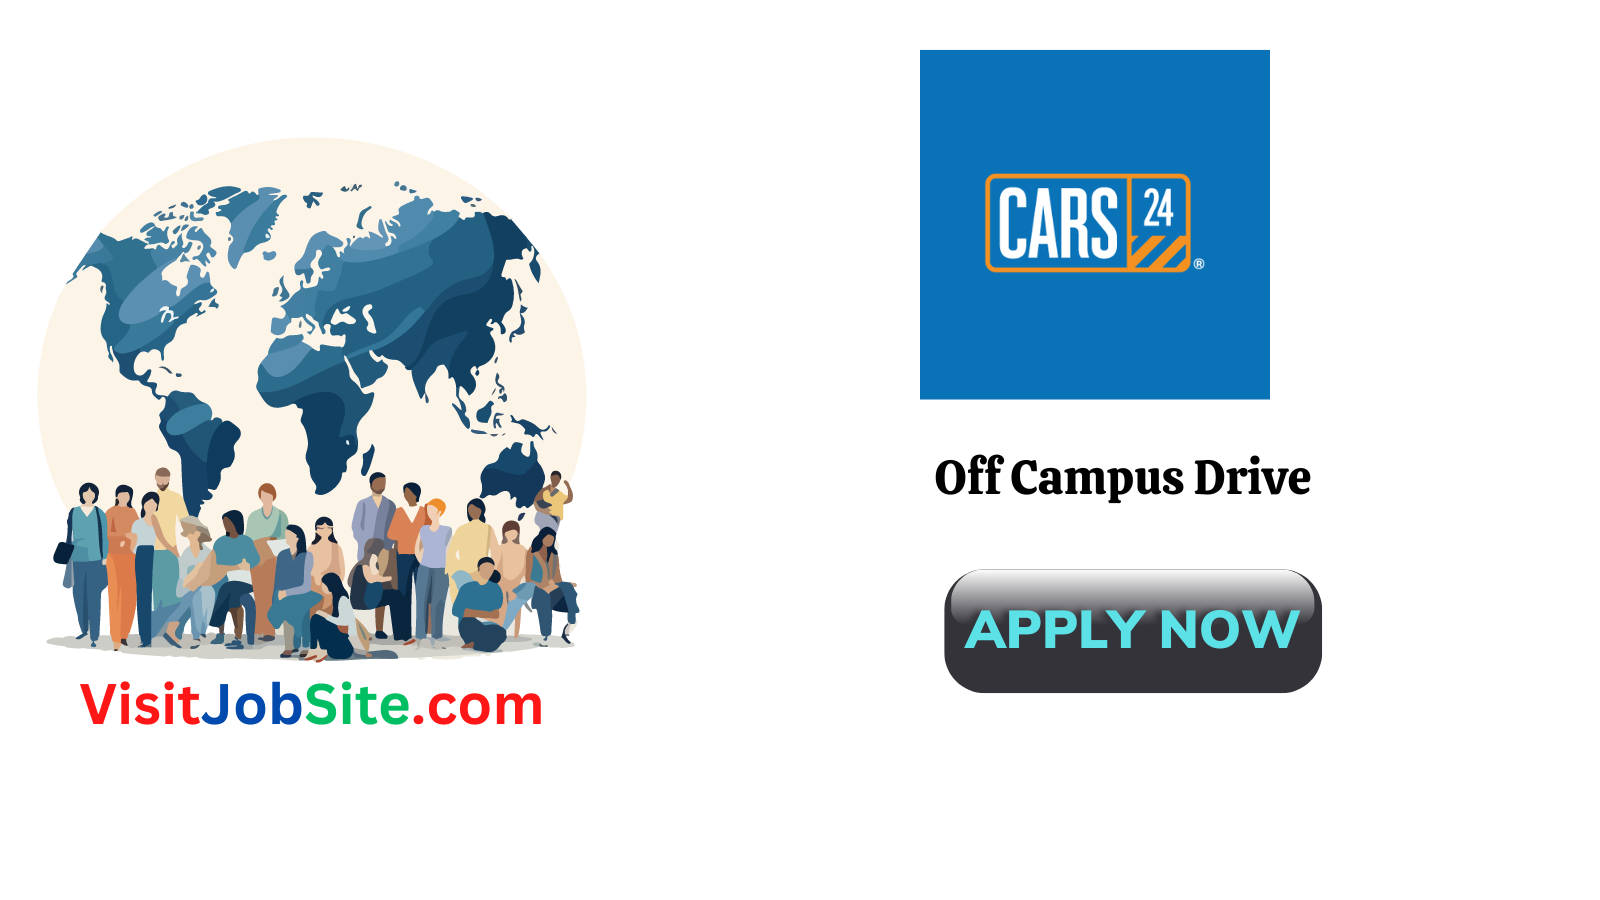 Cars24 Off Campus Drive